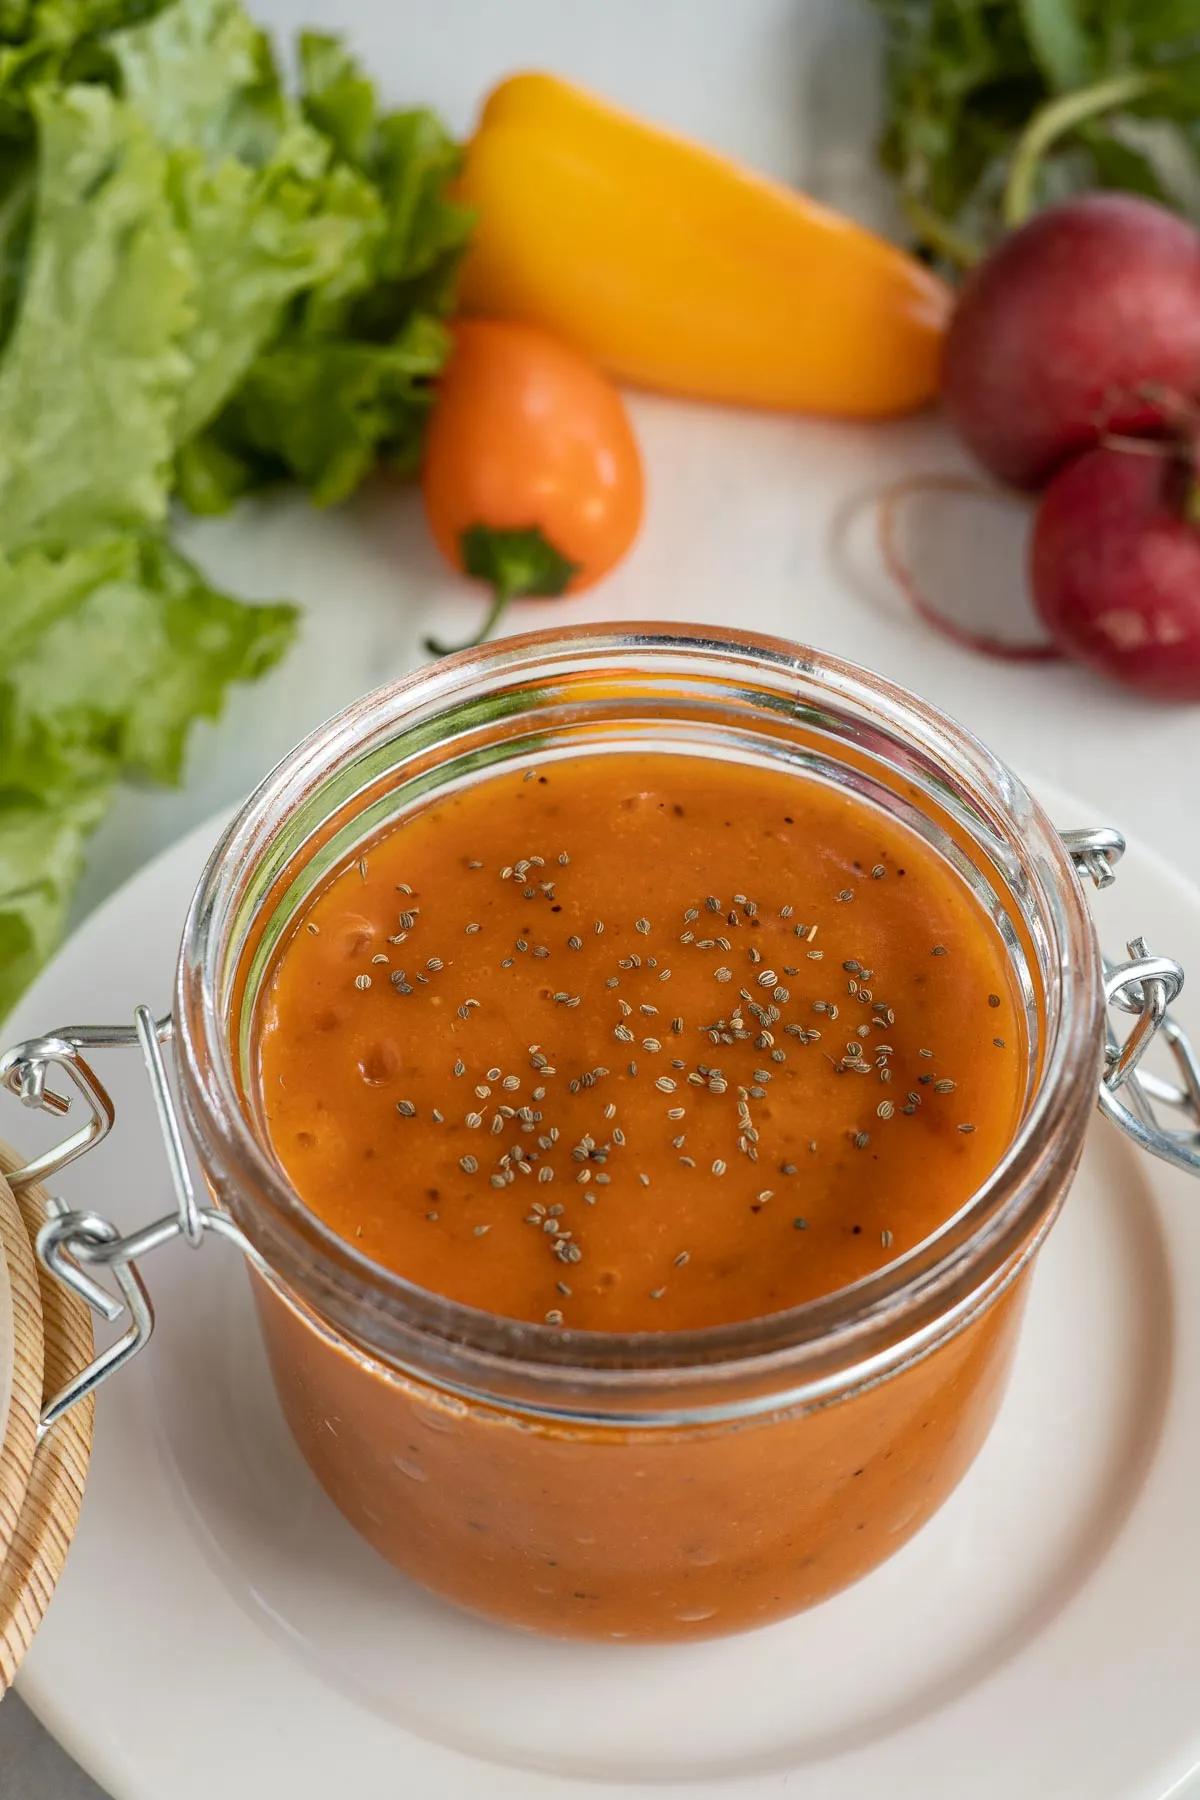 Easy Homemade French Dressing Recipe - Pitchfork Foodie Farms